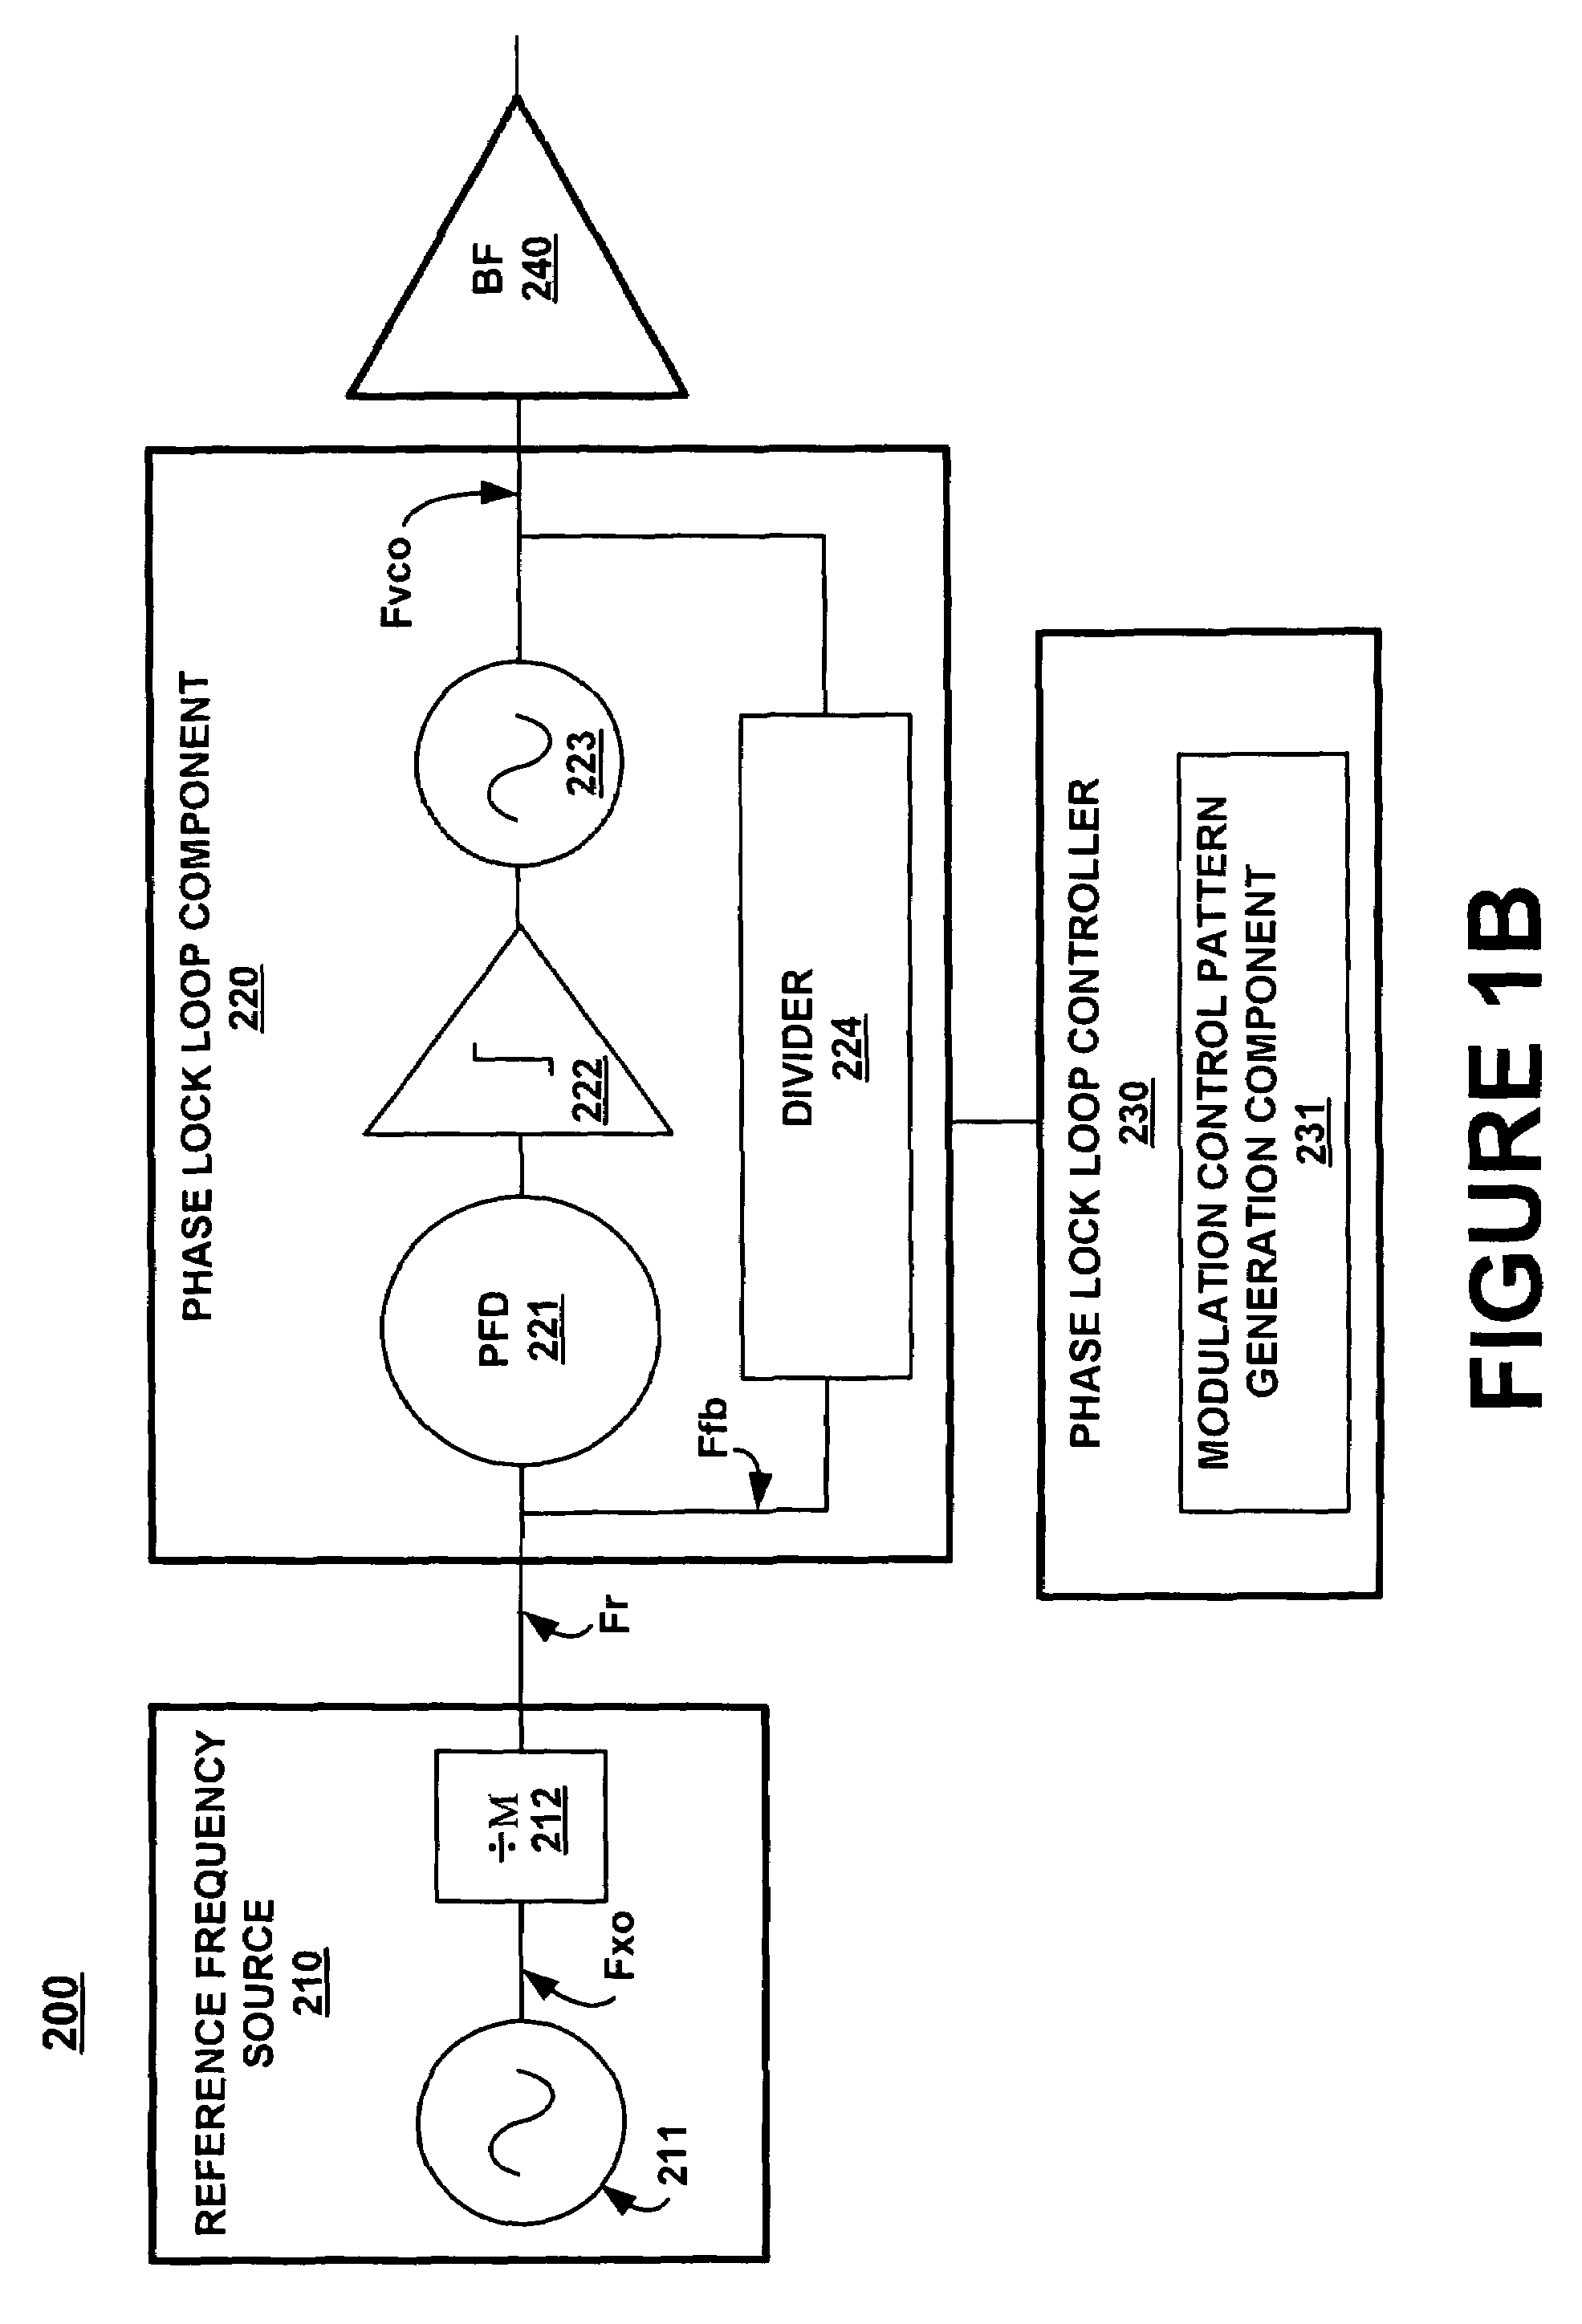 Spread spectrum frequency synthesizer with improved frequency shape by adjusting the length of a standard curve used for spread spectrum modulation